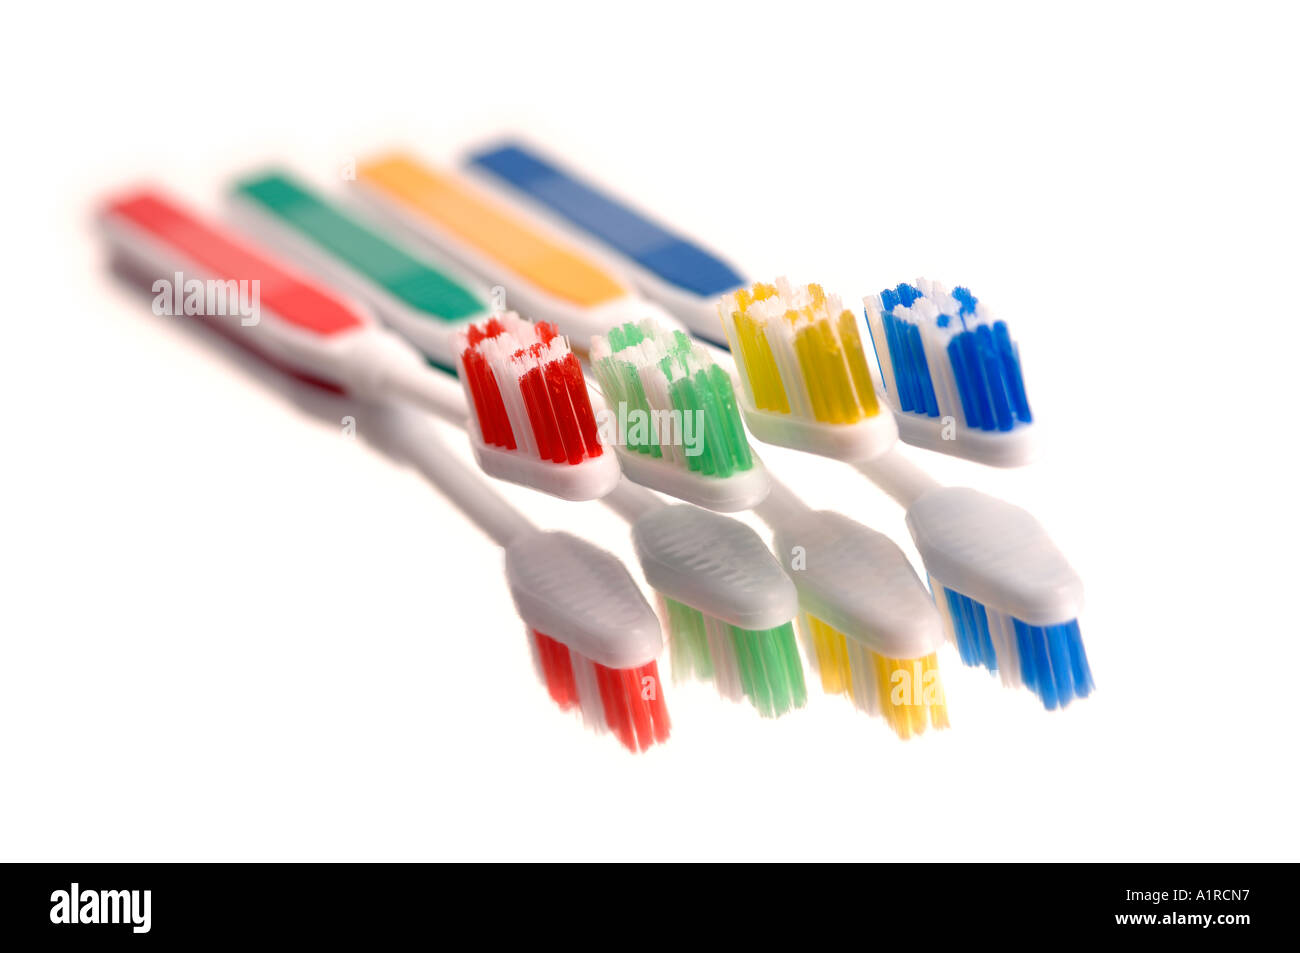 Four toothbrushes Stock Photo